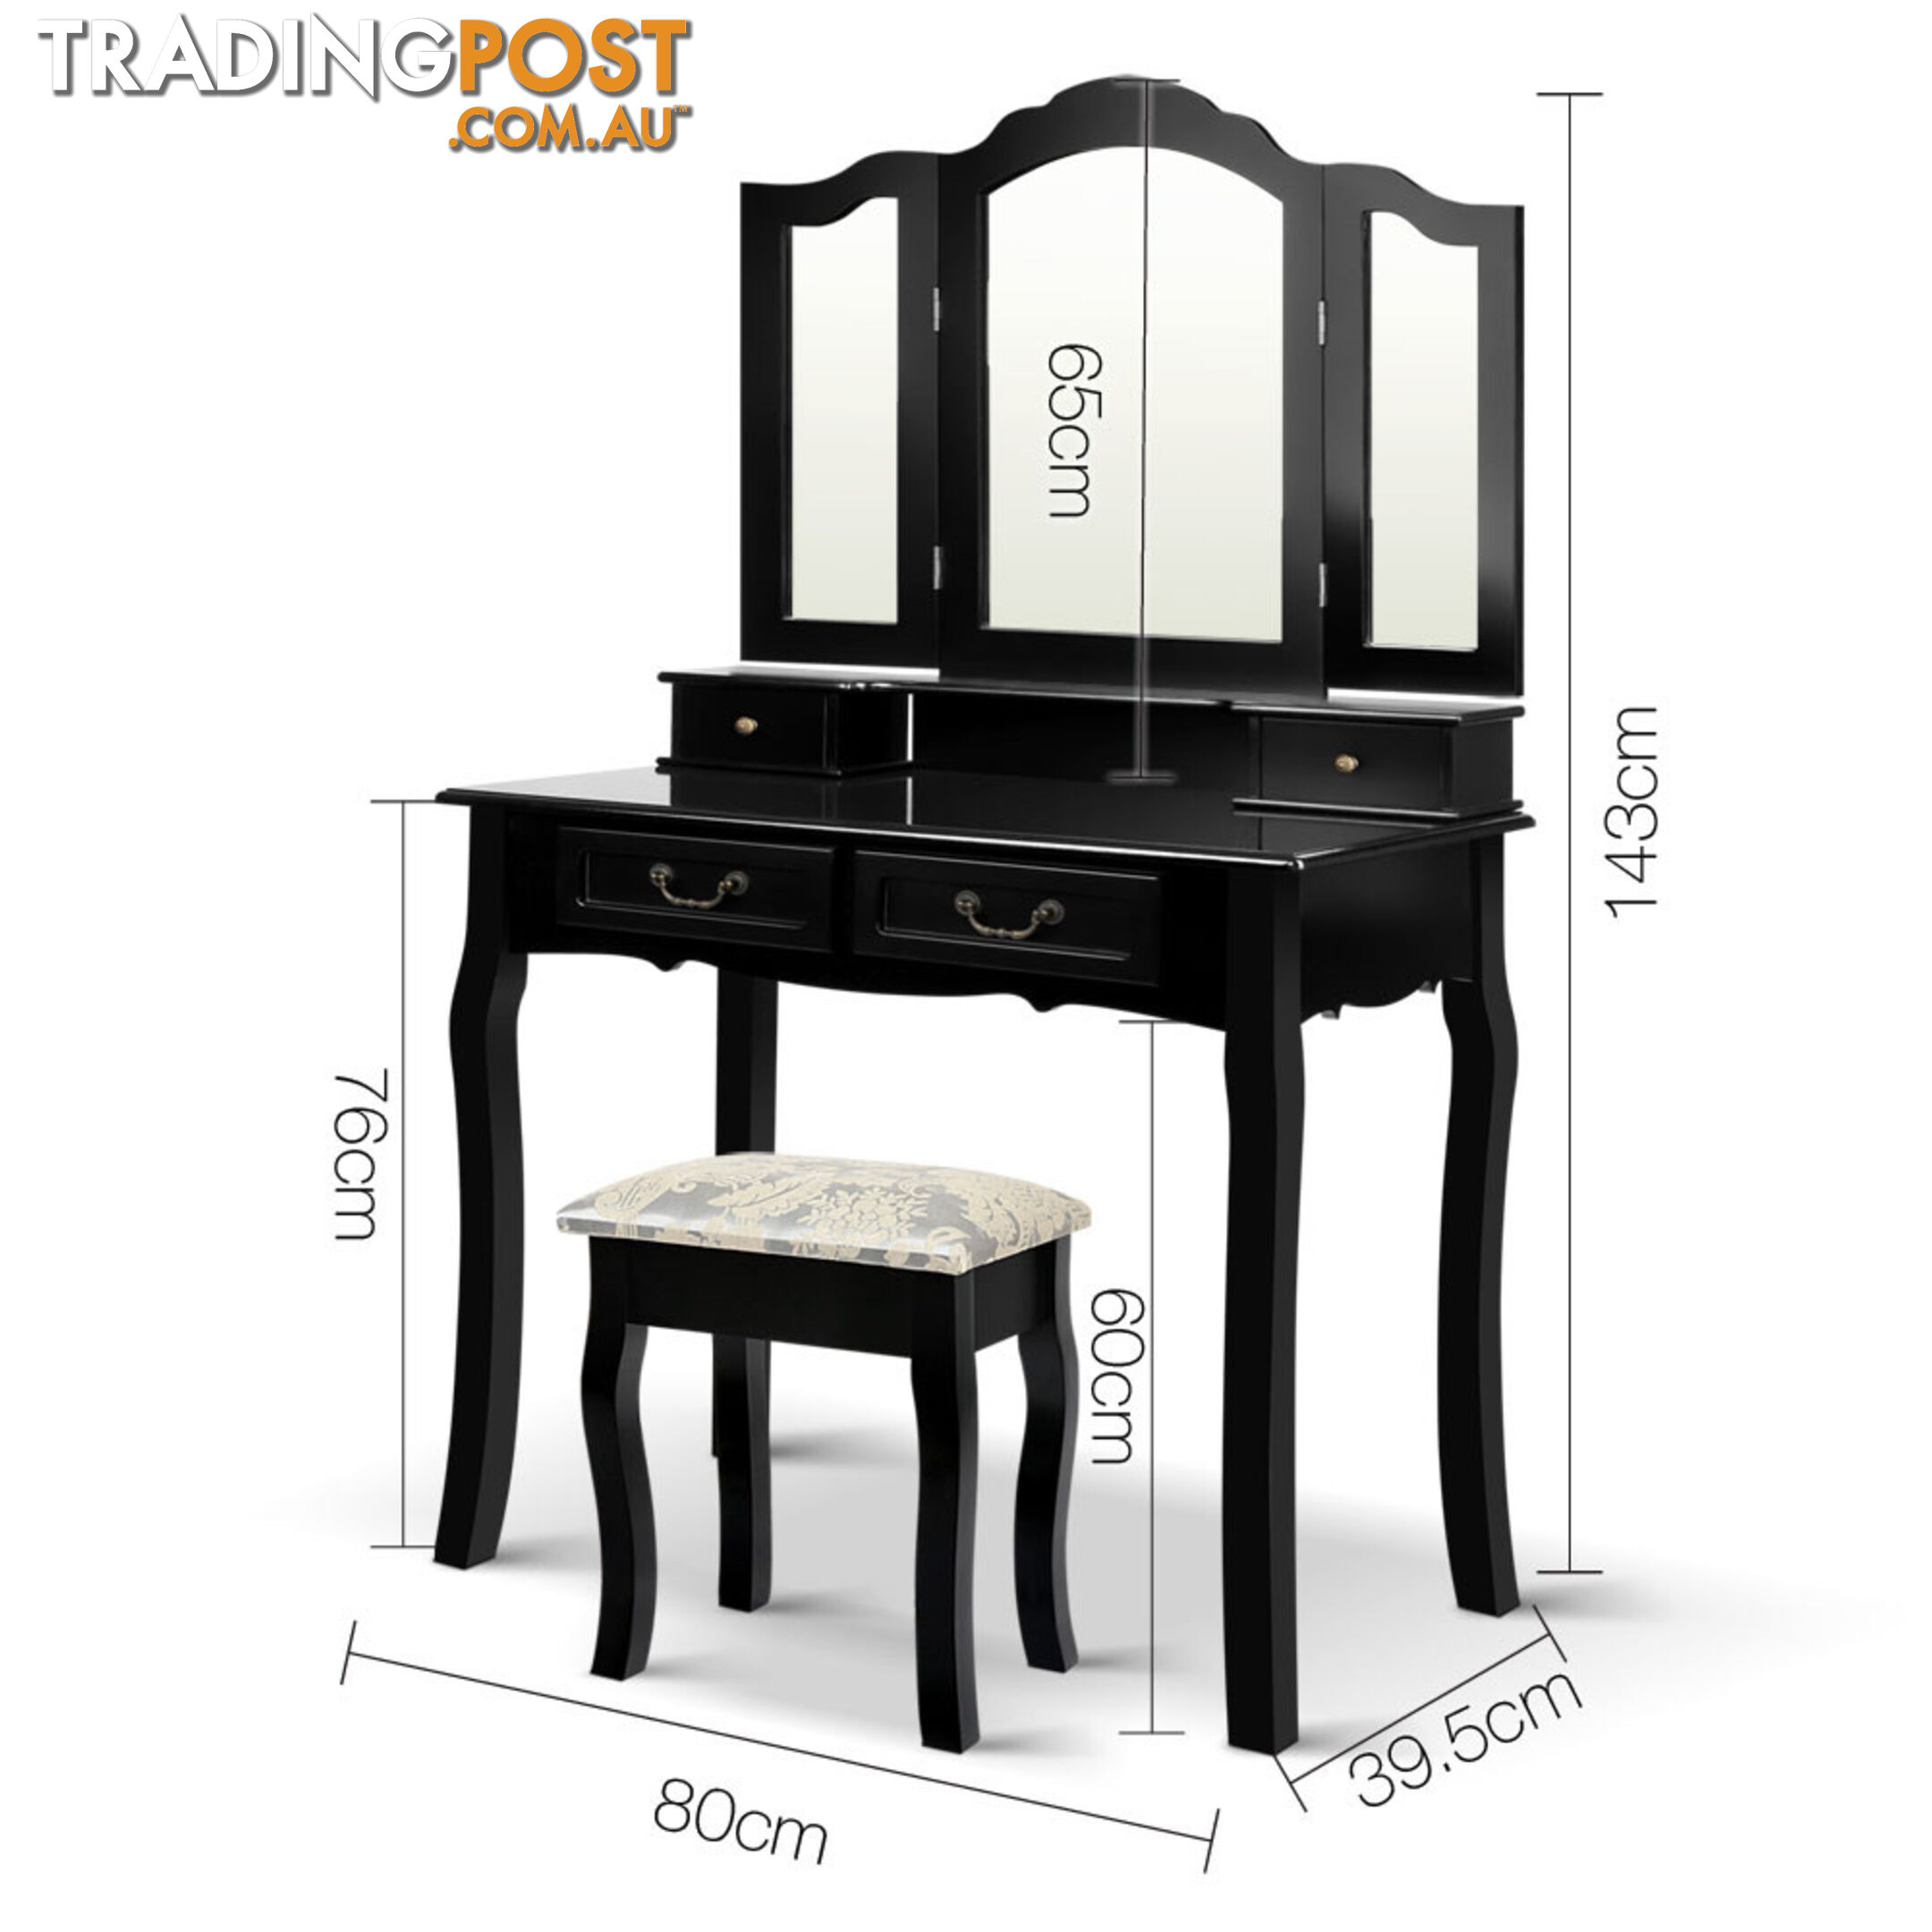 4 Drawer Dressing Table with Mirror - Black